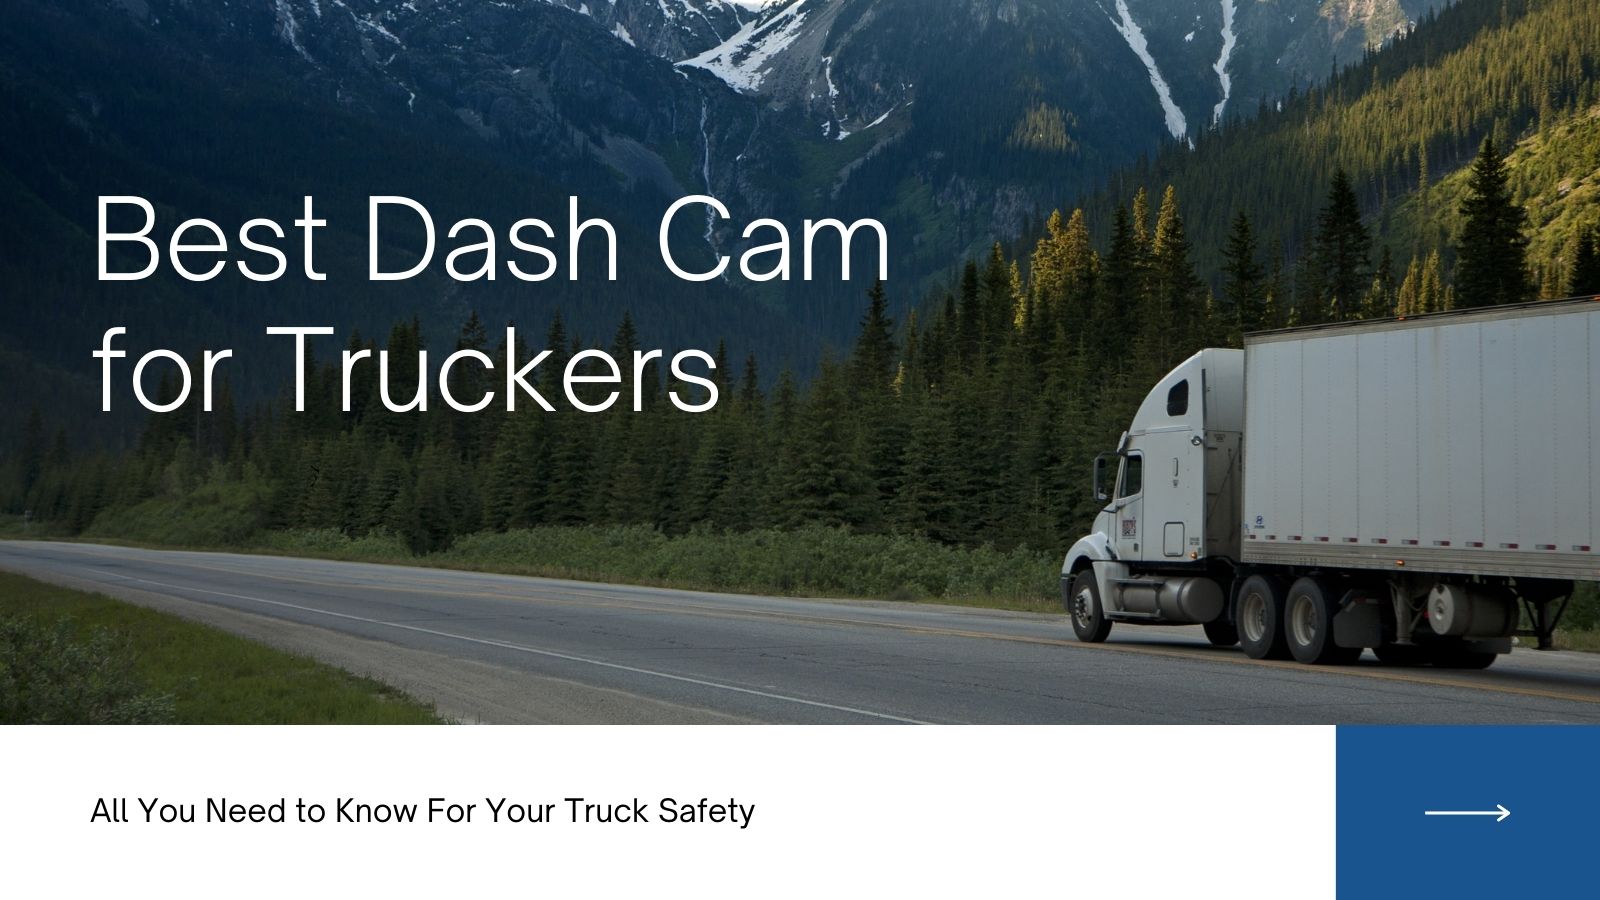 Best Dash Cam for Truckers- All You Need to Know For Your Truck Safety